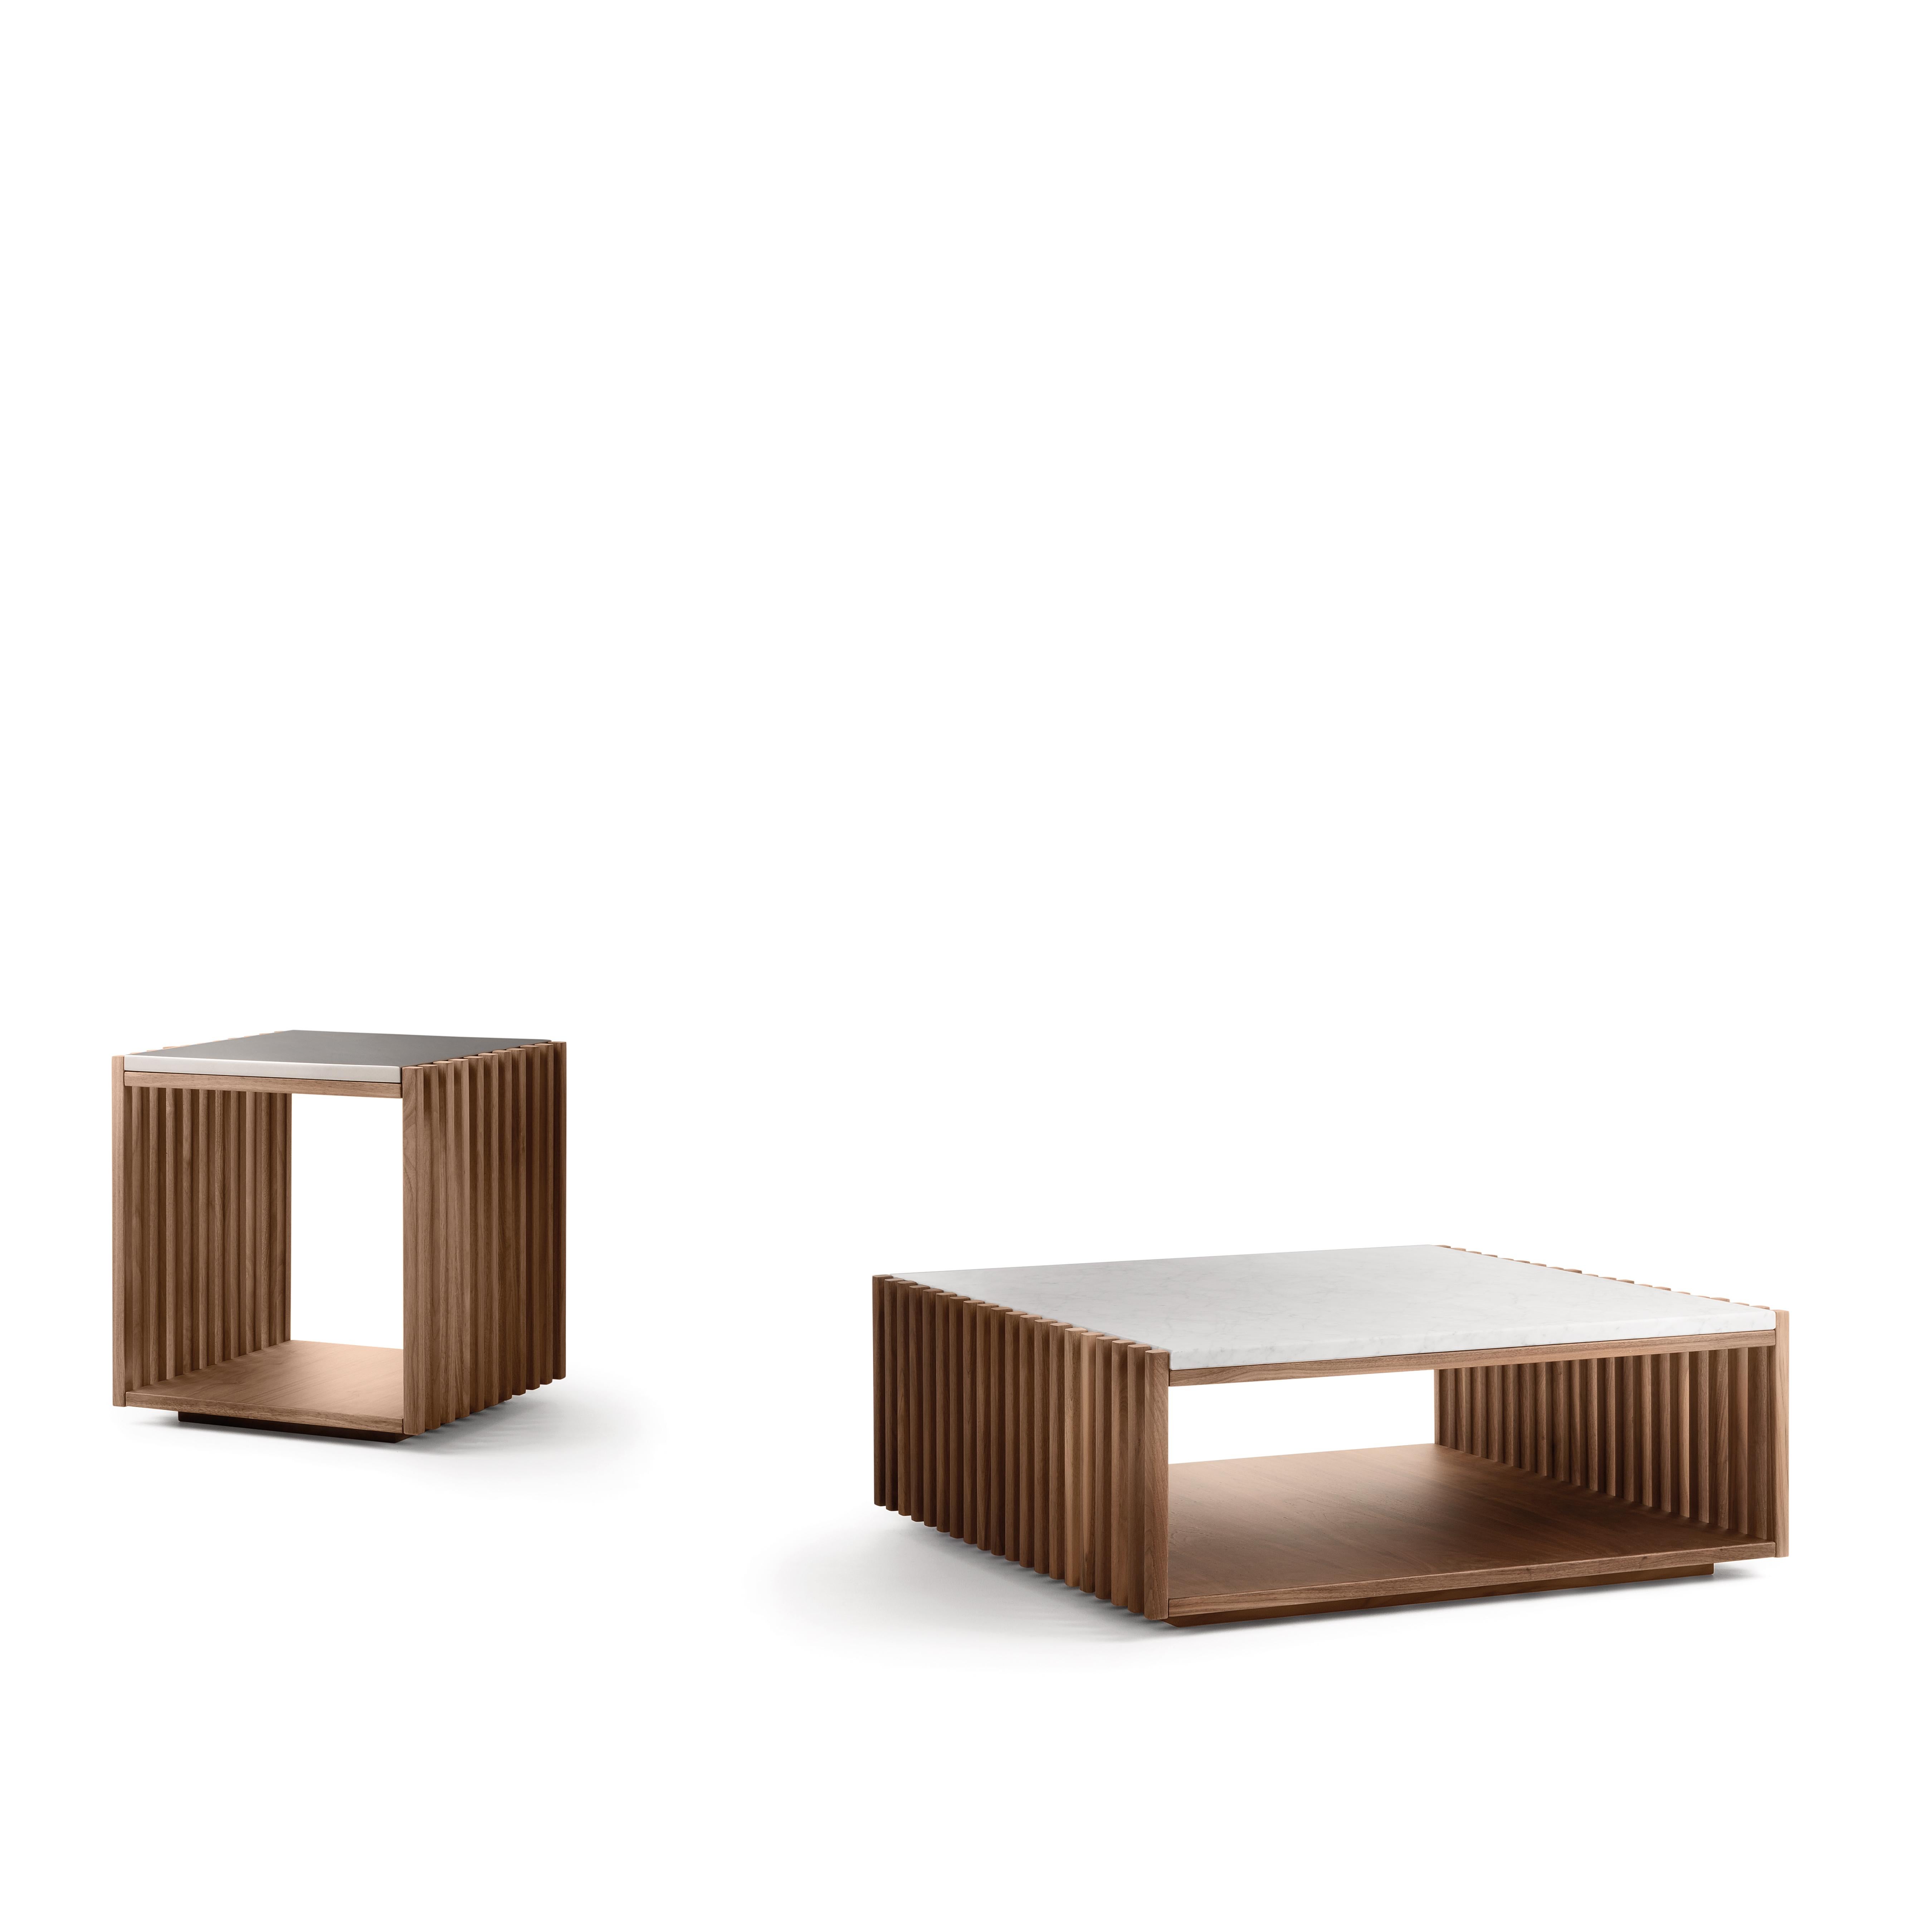 The Bolgheri coffee table, shaped like a wide, low parallelepiped, was designed by 74 RAM.
Pair of Bólgheri small tables featuring basic shapes and pure volumes. 
The design is inspired by the light playing between the strips and casting different